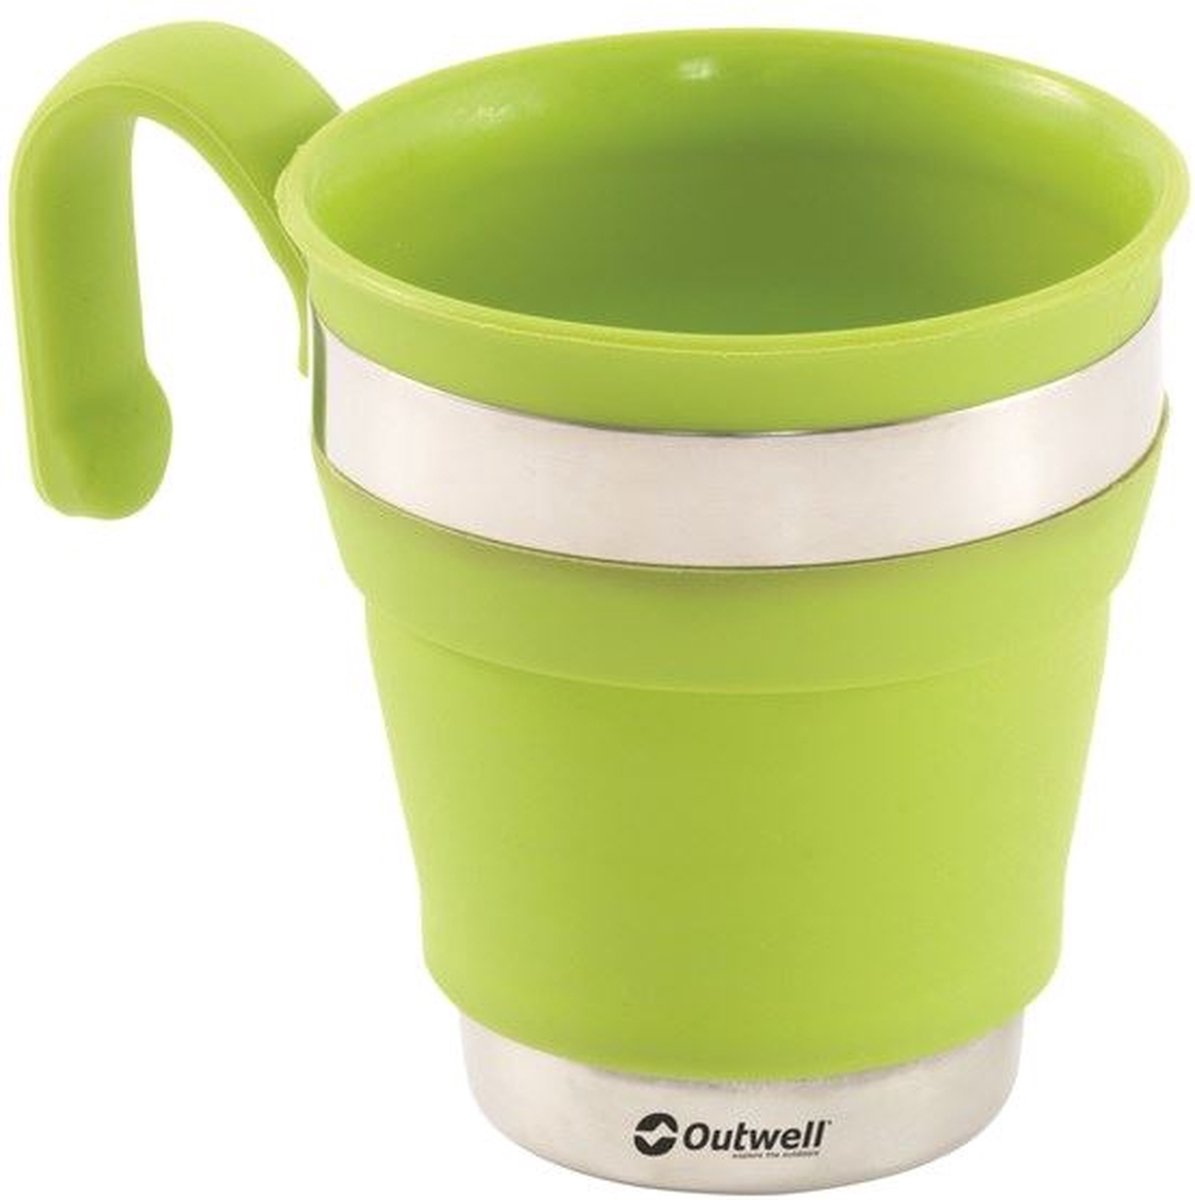 Outwell Collaps Mug Green